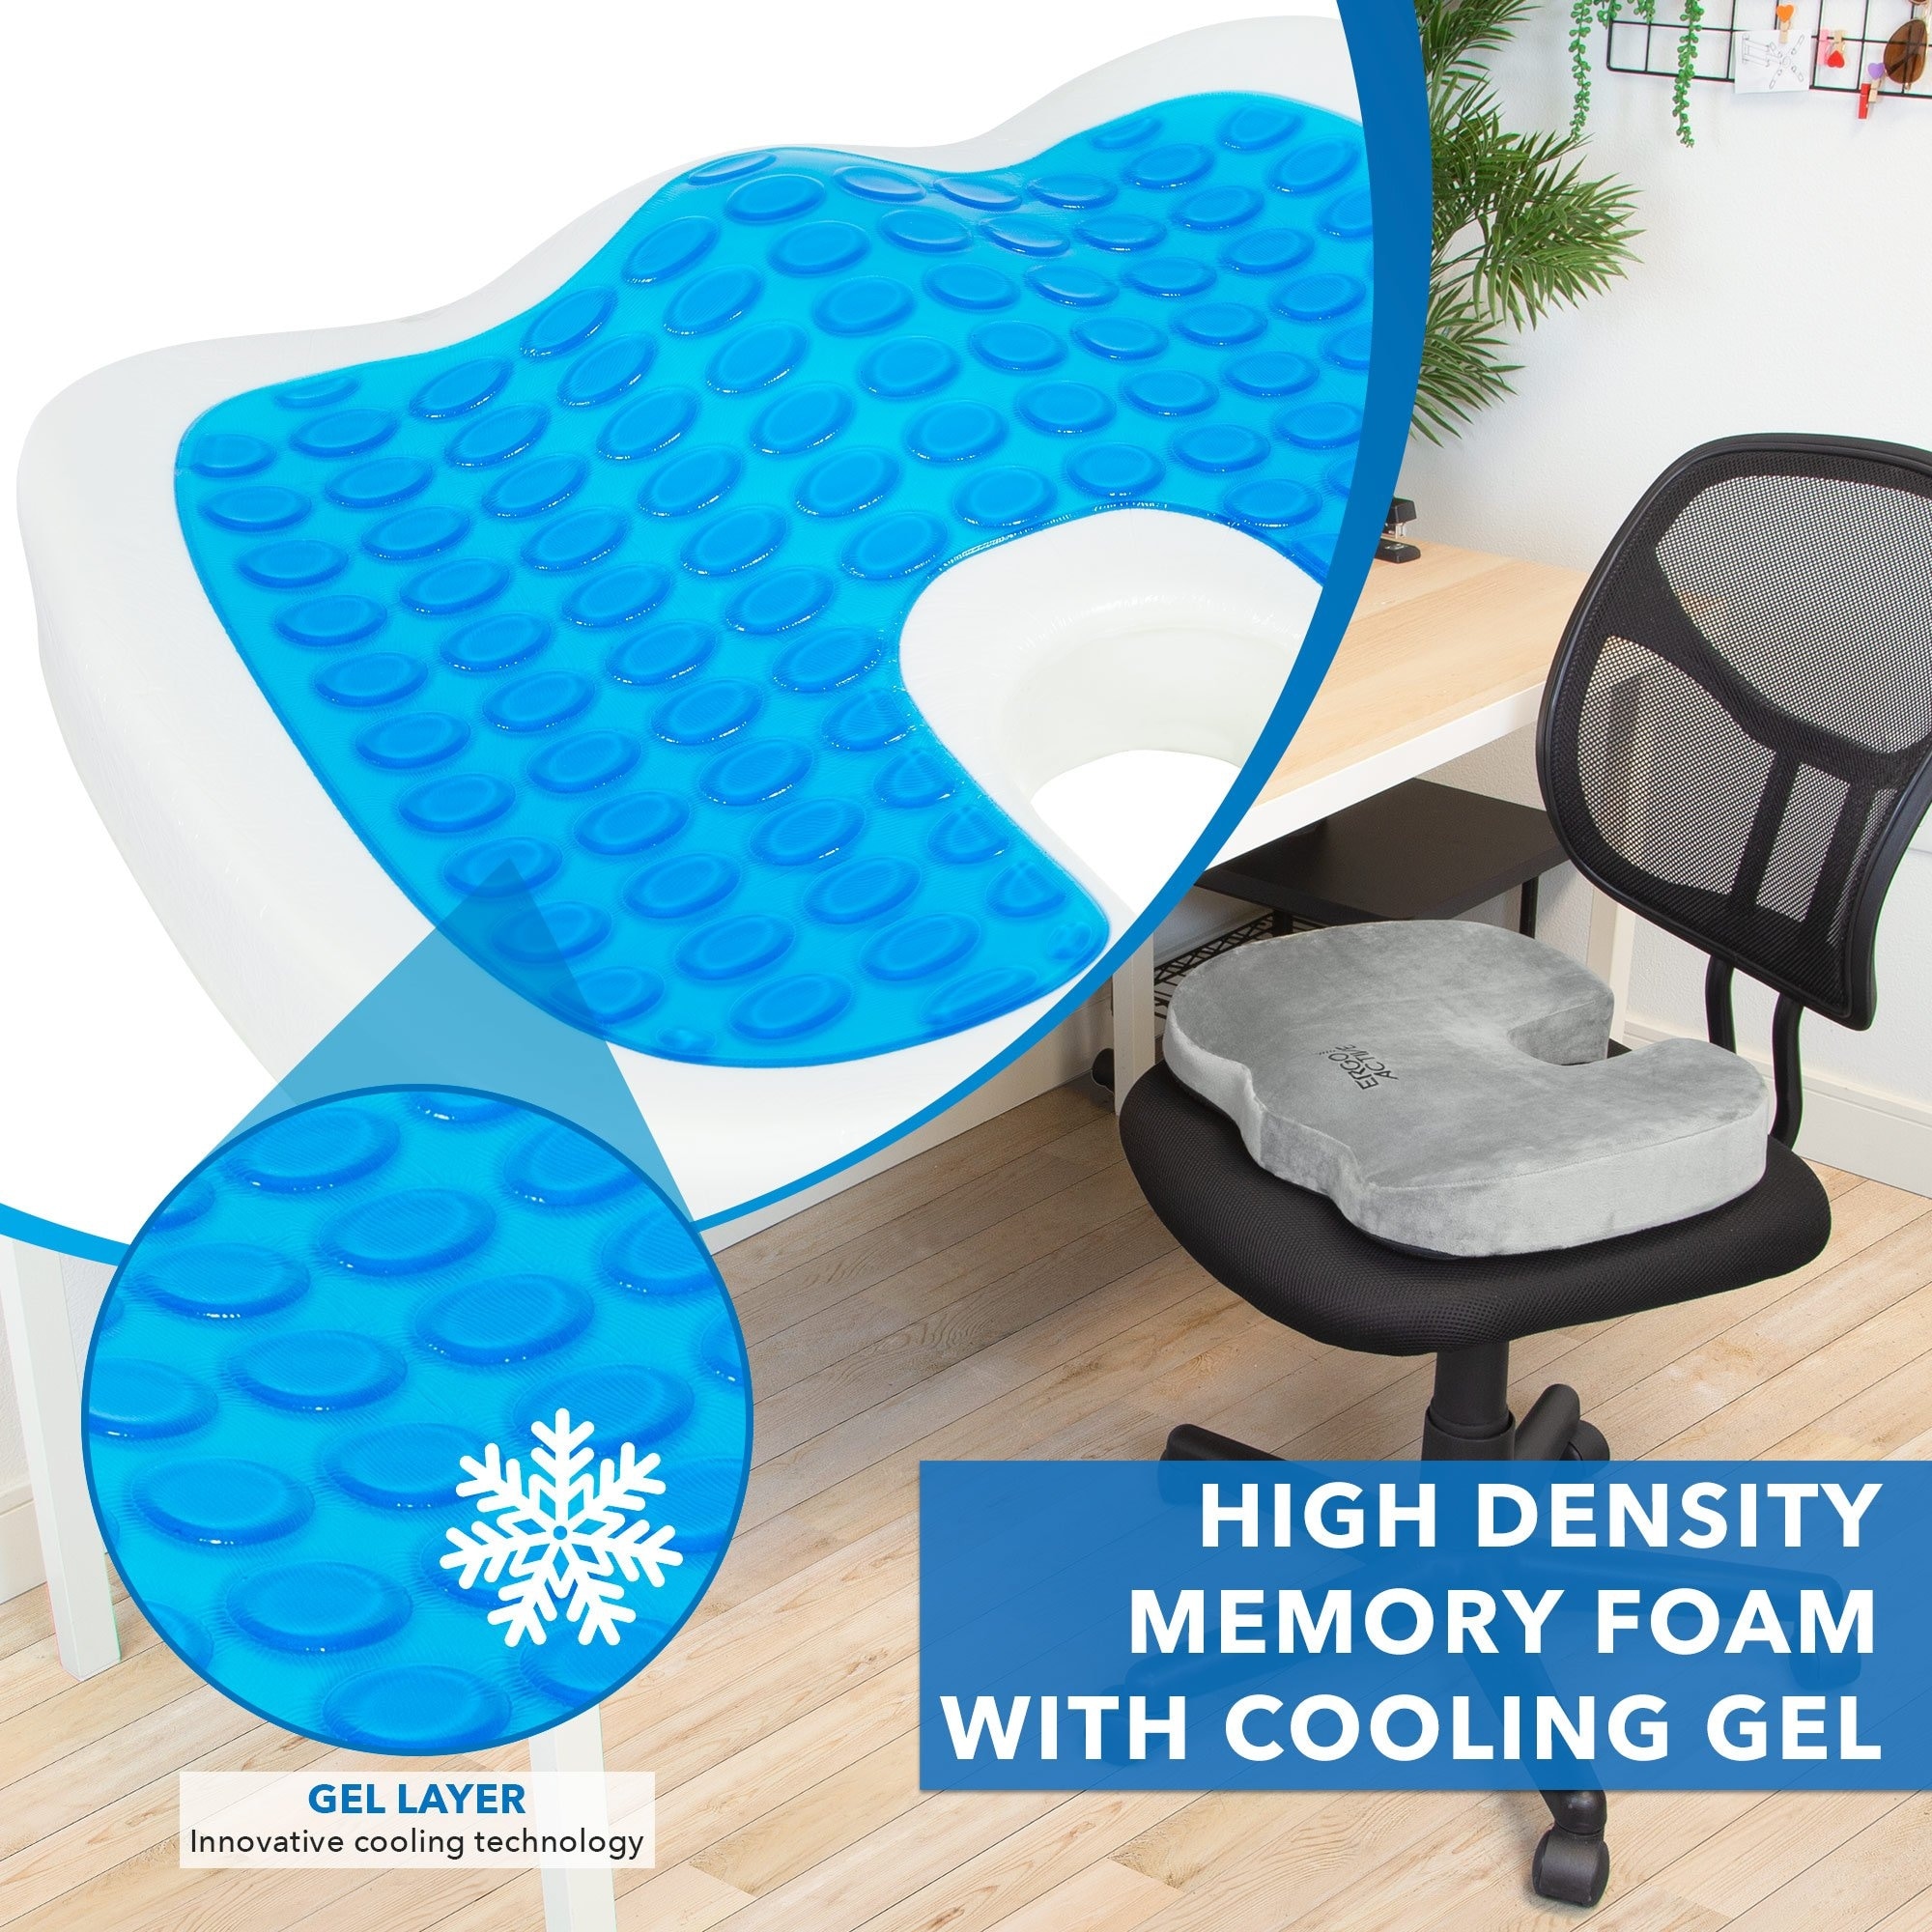 https://ak1.ostkcdn.com/images/products/is/images/direct/be633d68c65c9e2f7a0431f7e99c37a04bcd8773/Gel-Enhanced-Seat-Cushion-%7C-MI-1201.jpg